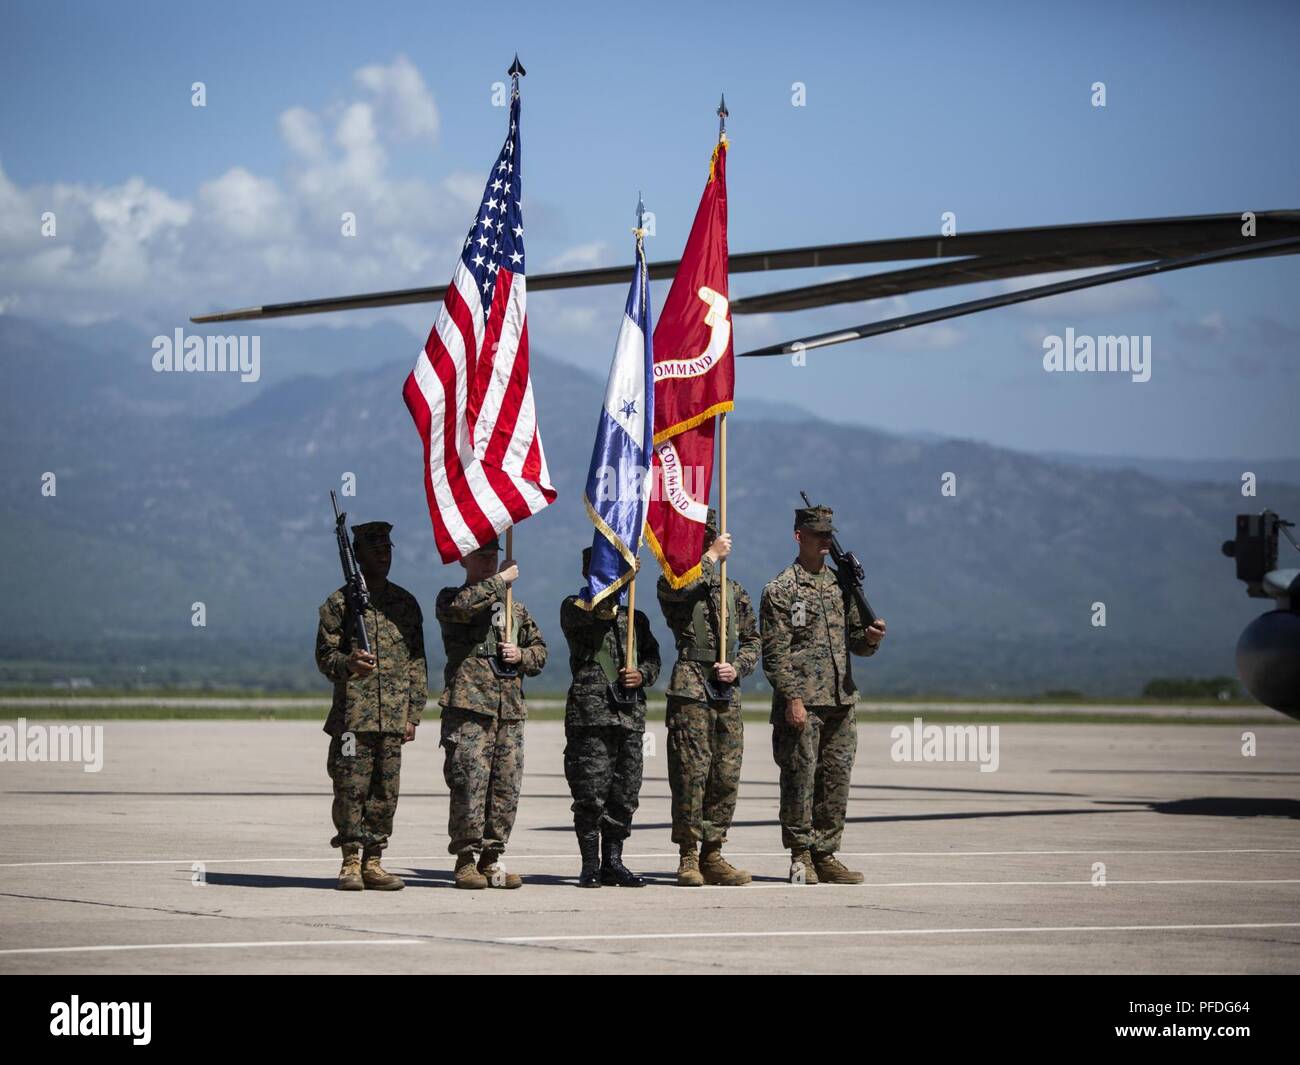 A multinational color guard comprised of Marines with Special Purpose Marine Air-Ground Task Force - Southern Command and a Honduran Army soldier carry colors during an opening ceremony on Soto Cano Air Base, Honduras, to mark the beginning of SPMAGTF-SC deployment to Latin America and the Caribbean, June 11, 2018. The Marines and sailors of SPMAGTF-SC will conduct security cooperation training and engineering projects alongside partner nation military forces in Central and South America during their deployment. The unit is also on standby to provide humanitarian assistance and disaster relief Stock Photo